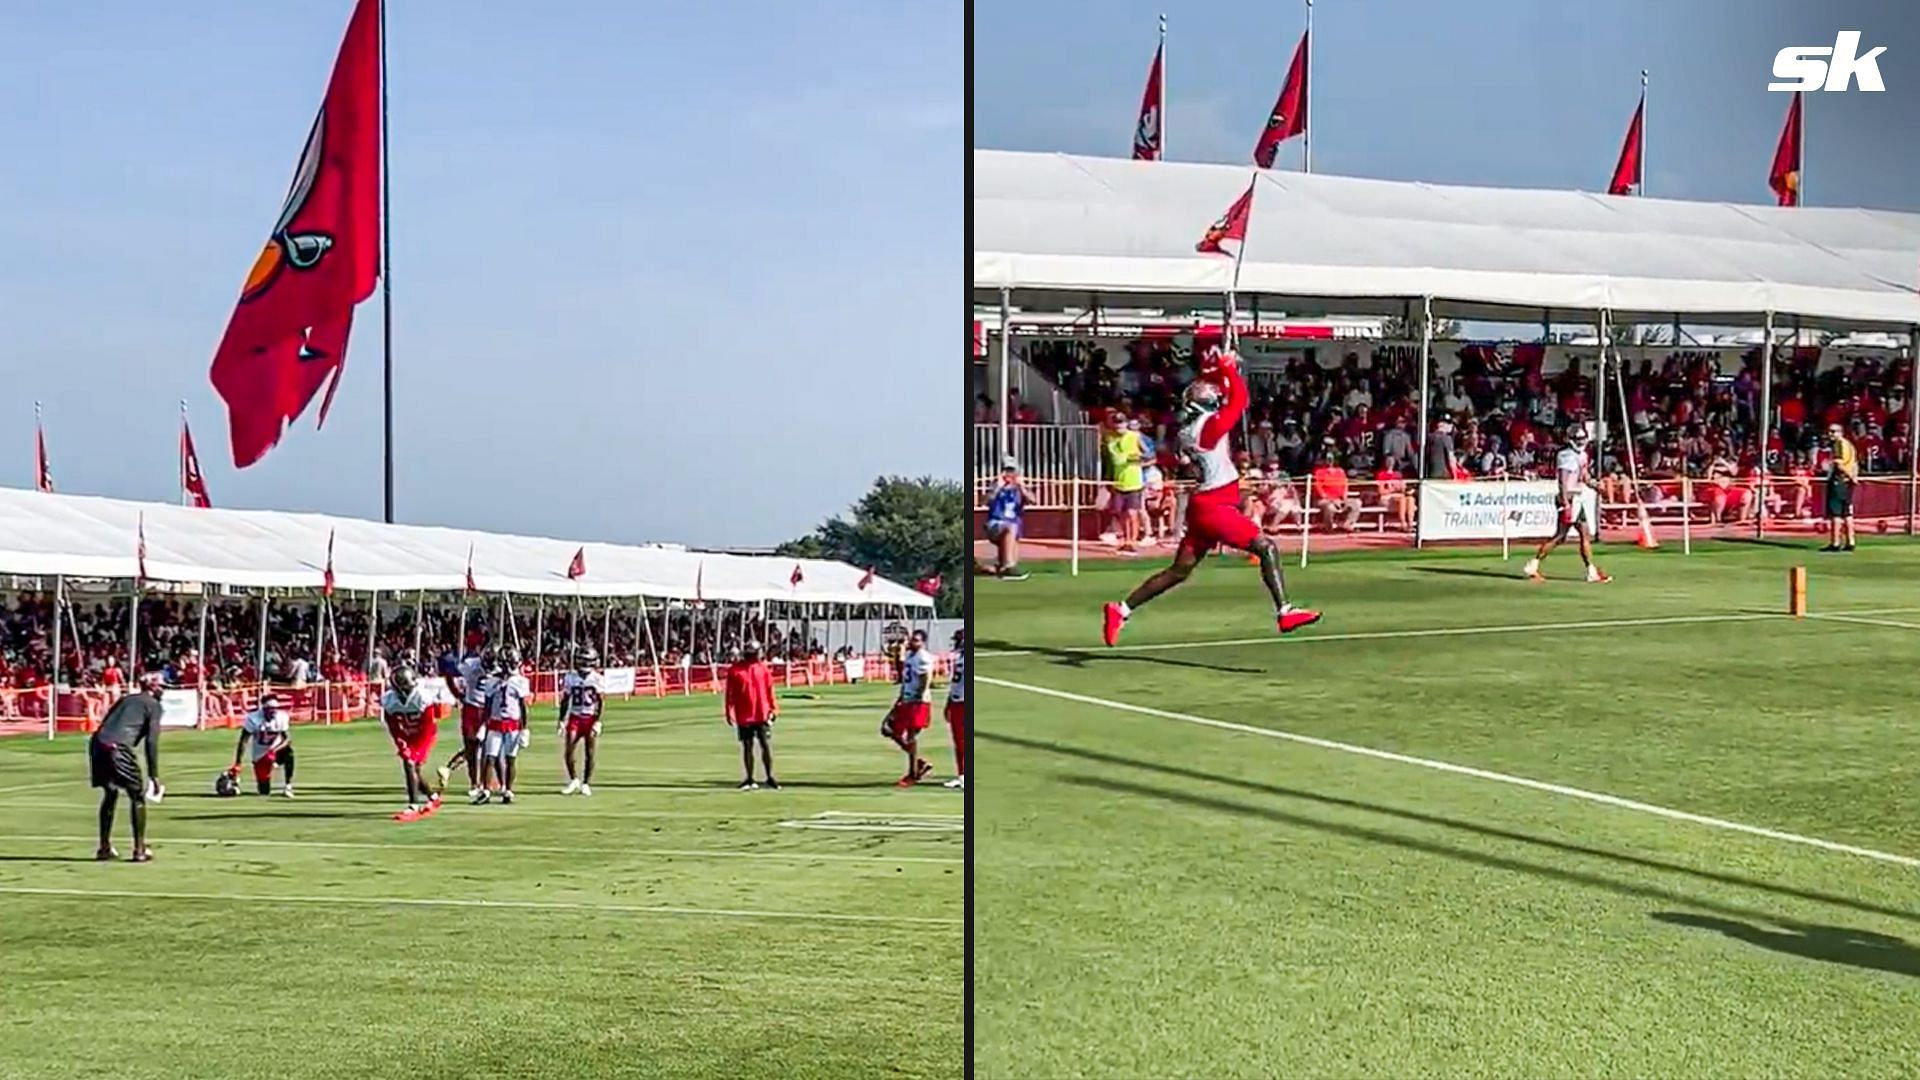 Tom Brady and Julio Jones teamed up at Tampa Bay Buccaneers&#039; training camp to put on a show